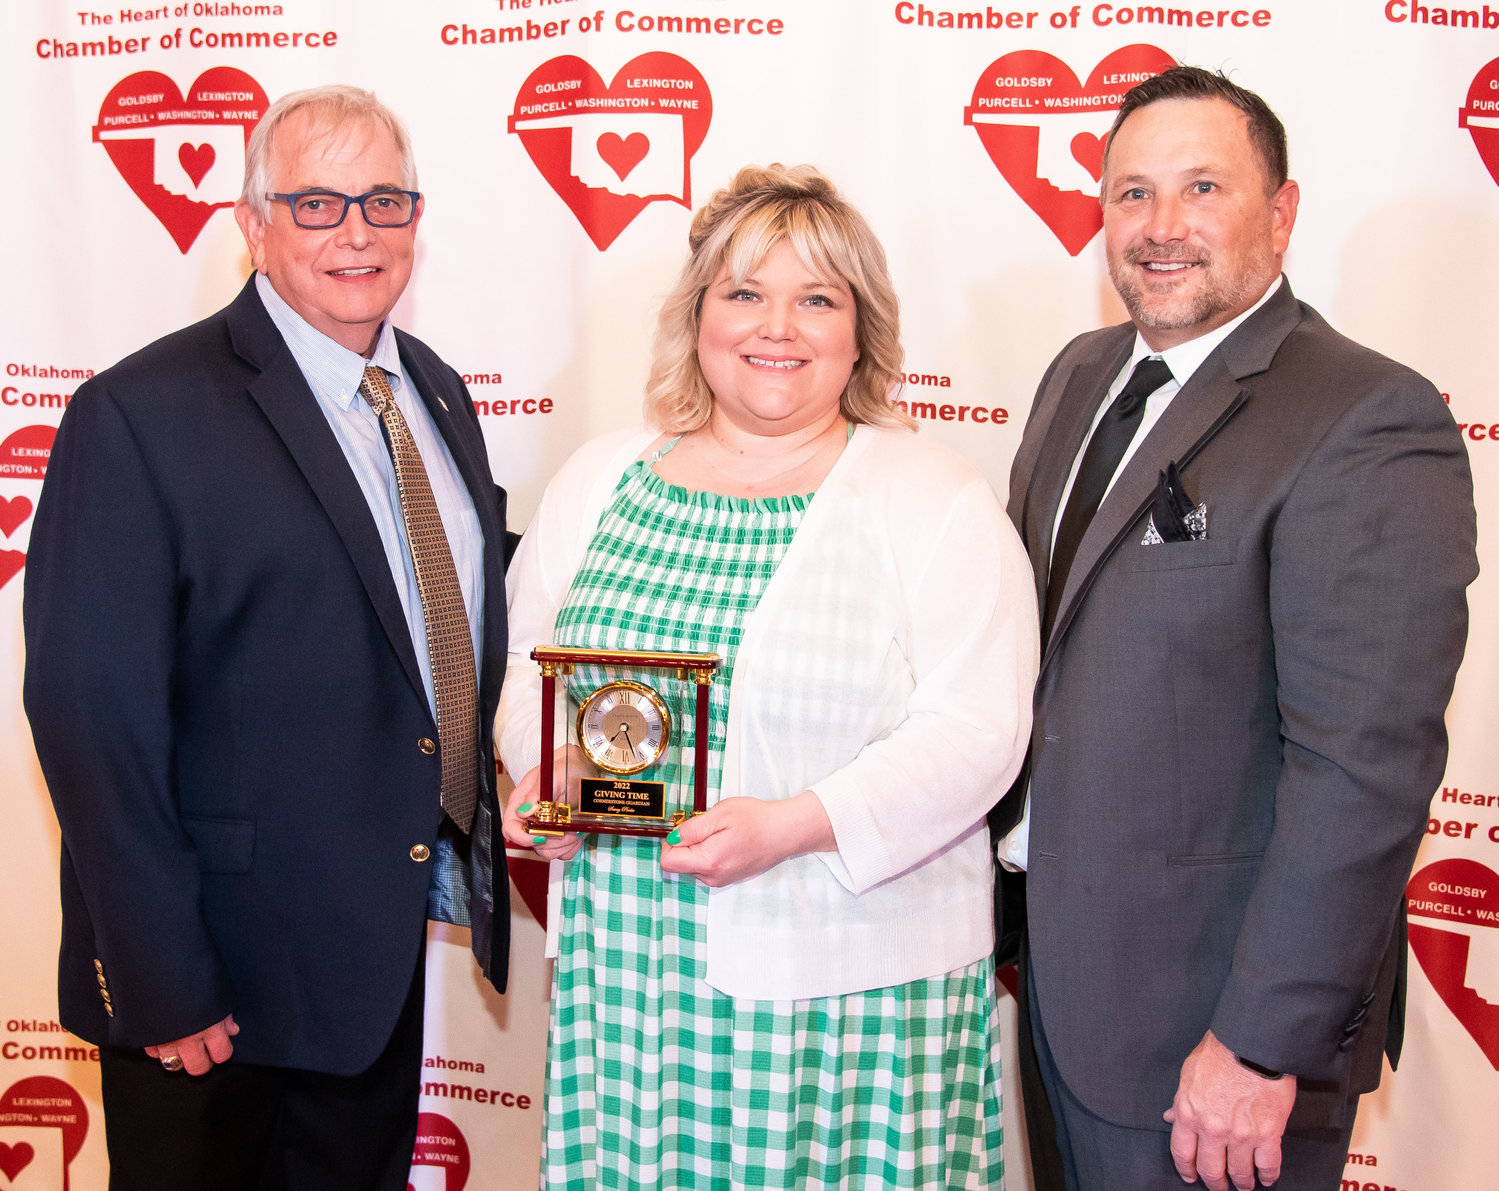 Purcell business woman Savannah Pyle was honored at the chamber banquet last Thursday as the Cornerstone Guardian winner. Pyle operates Savvy Parke in downtown Purcell. Making the presentation was City Manager Dale Bunn and Chamber President Chris Goldsby. The Cornerstone Guardian Award is given annually to honor distinguished corporate leadership.